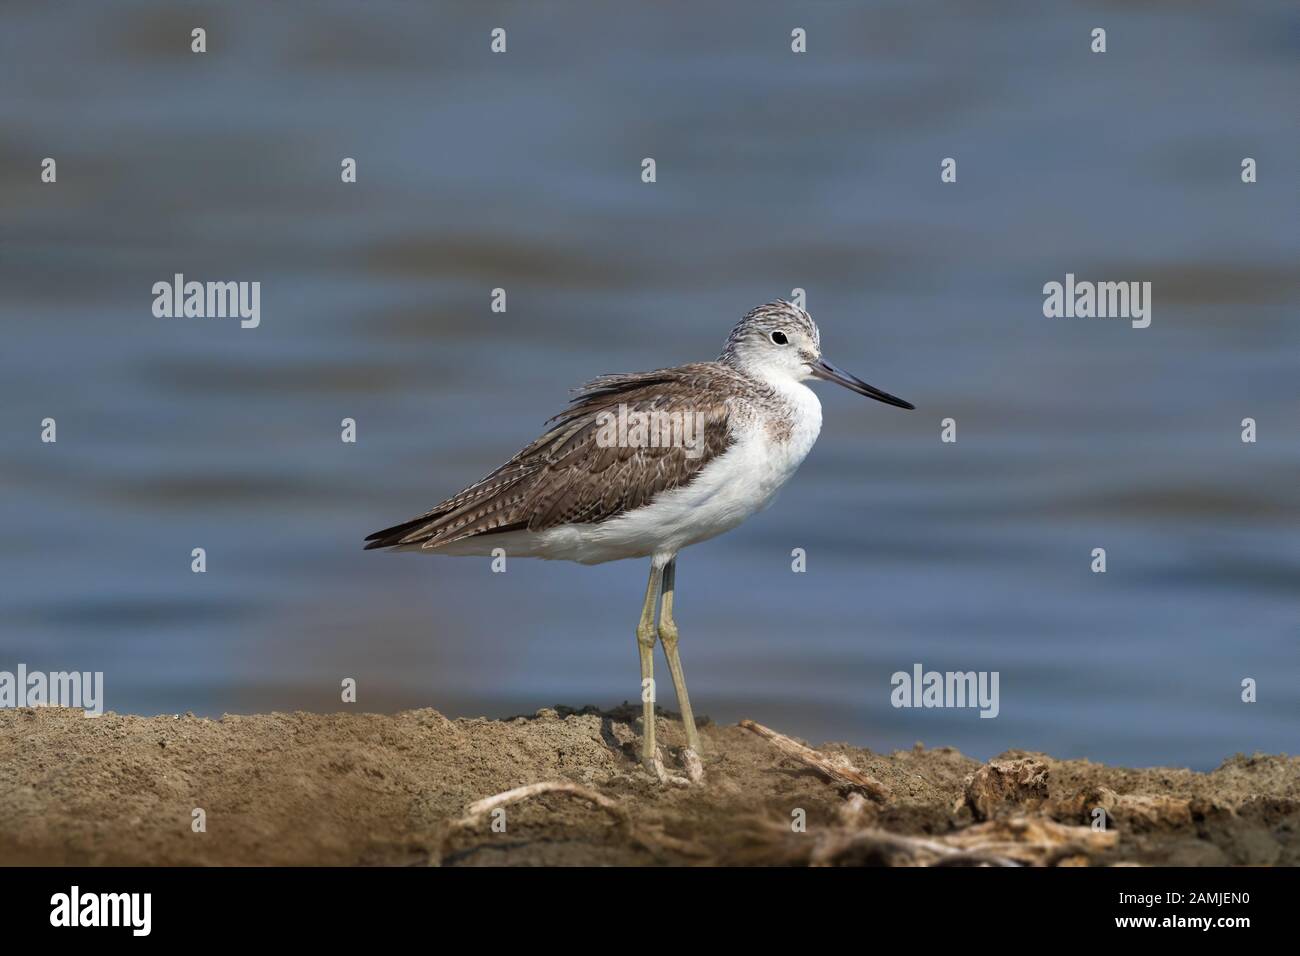 The common greenshank (Tringa nebularia) is a wader in the large family Scolopacidae, the typical waders. Stock Photo